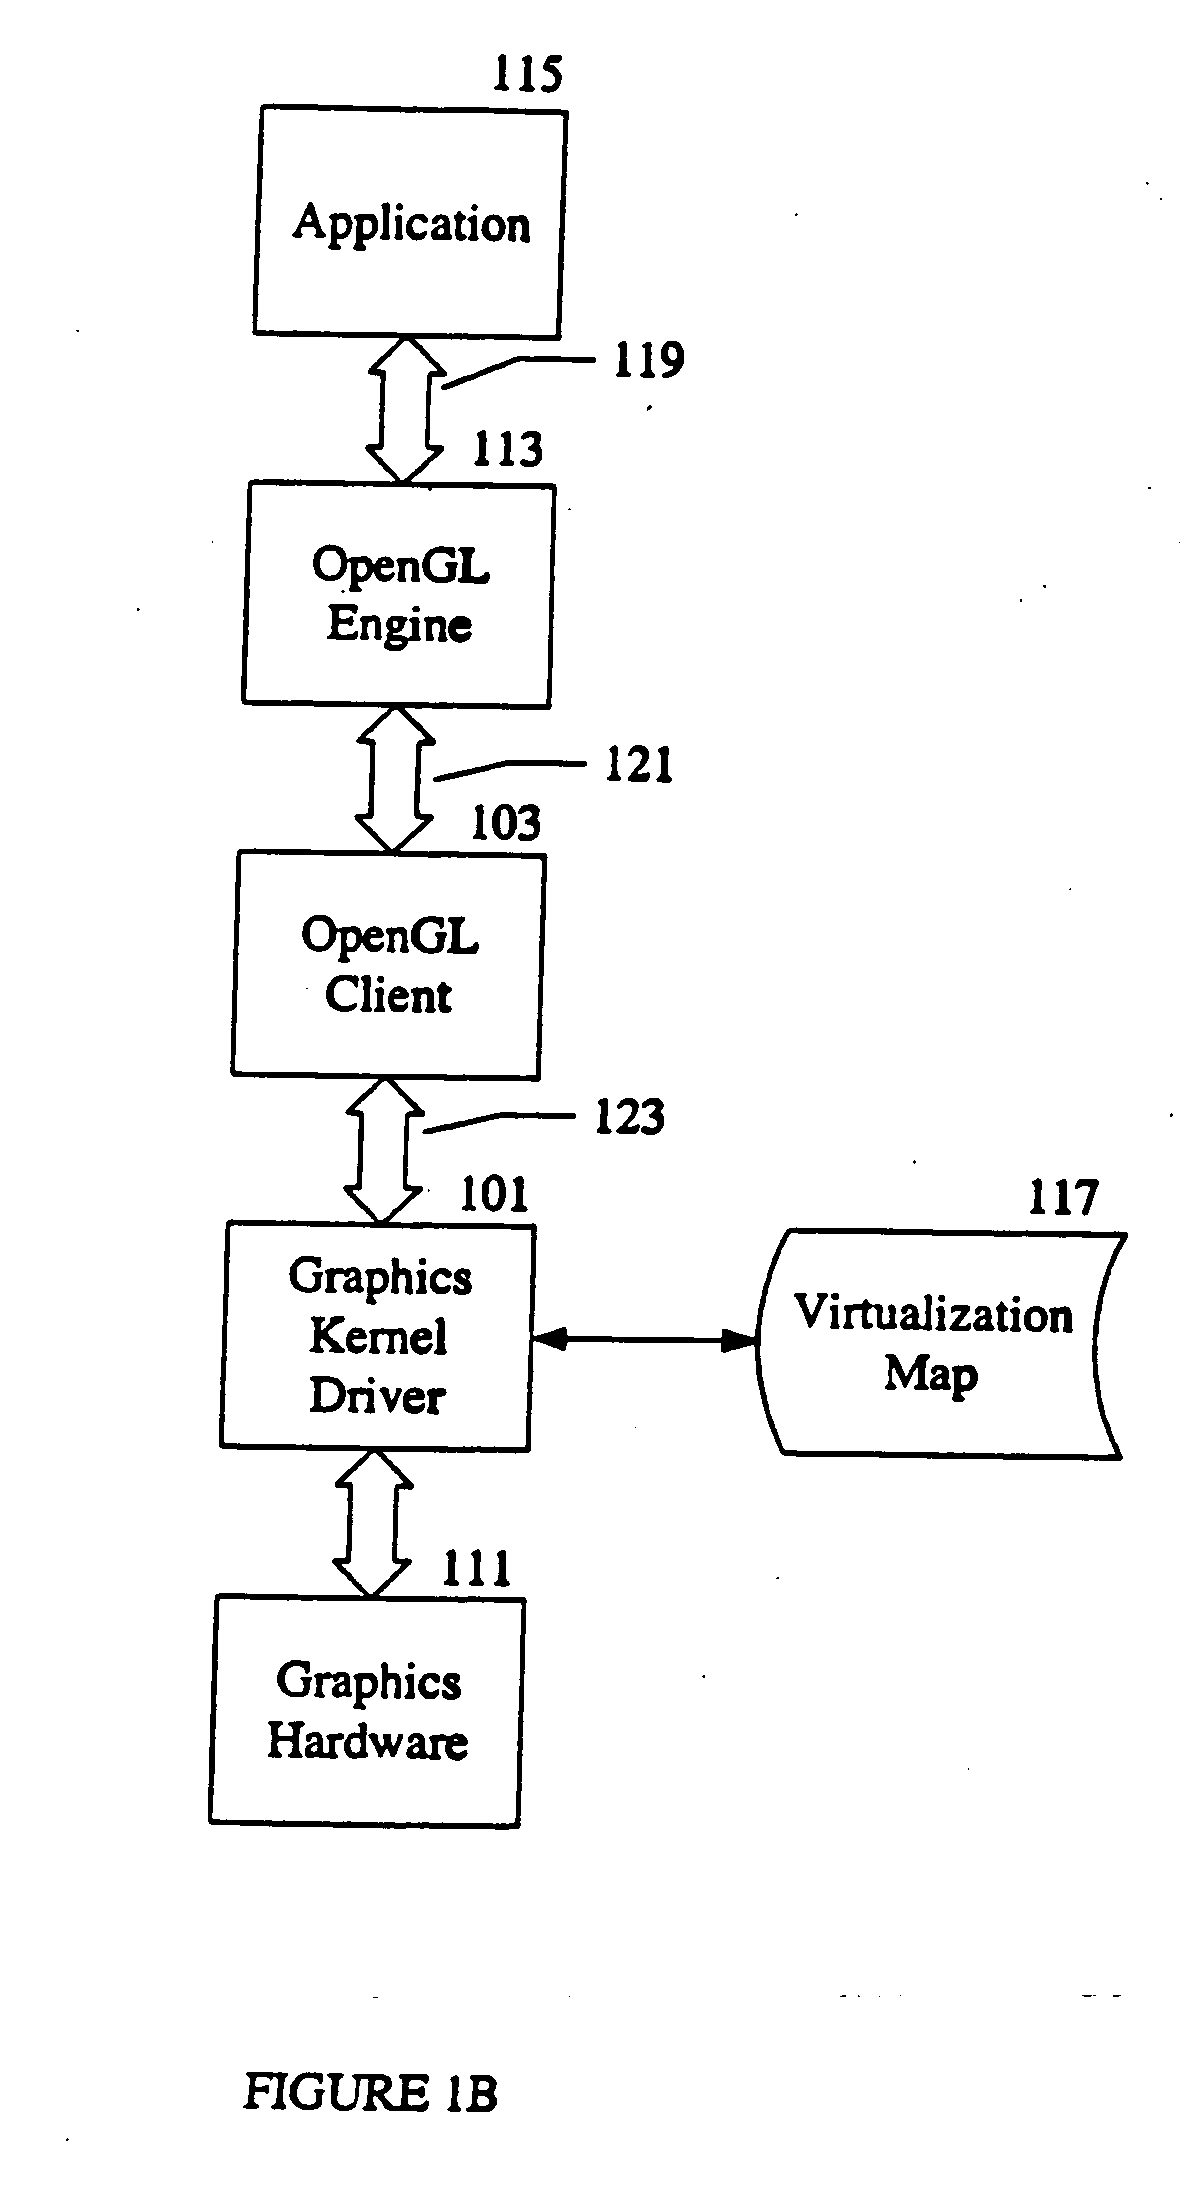 Virtualization of graphics resources